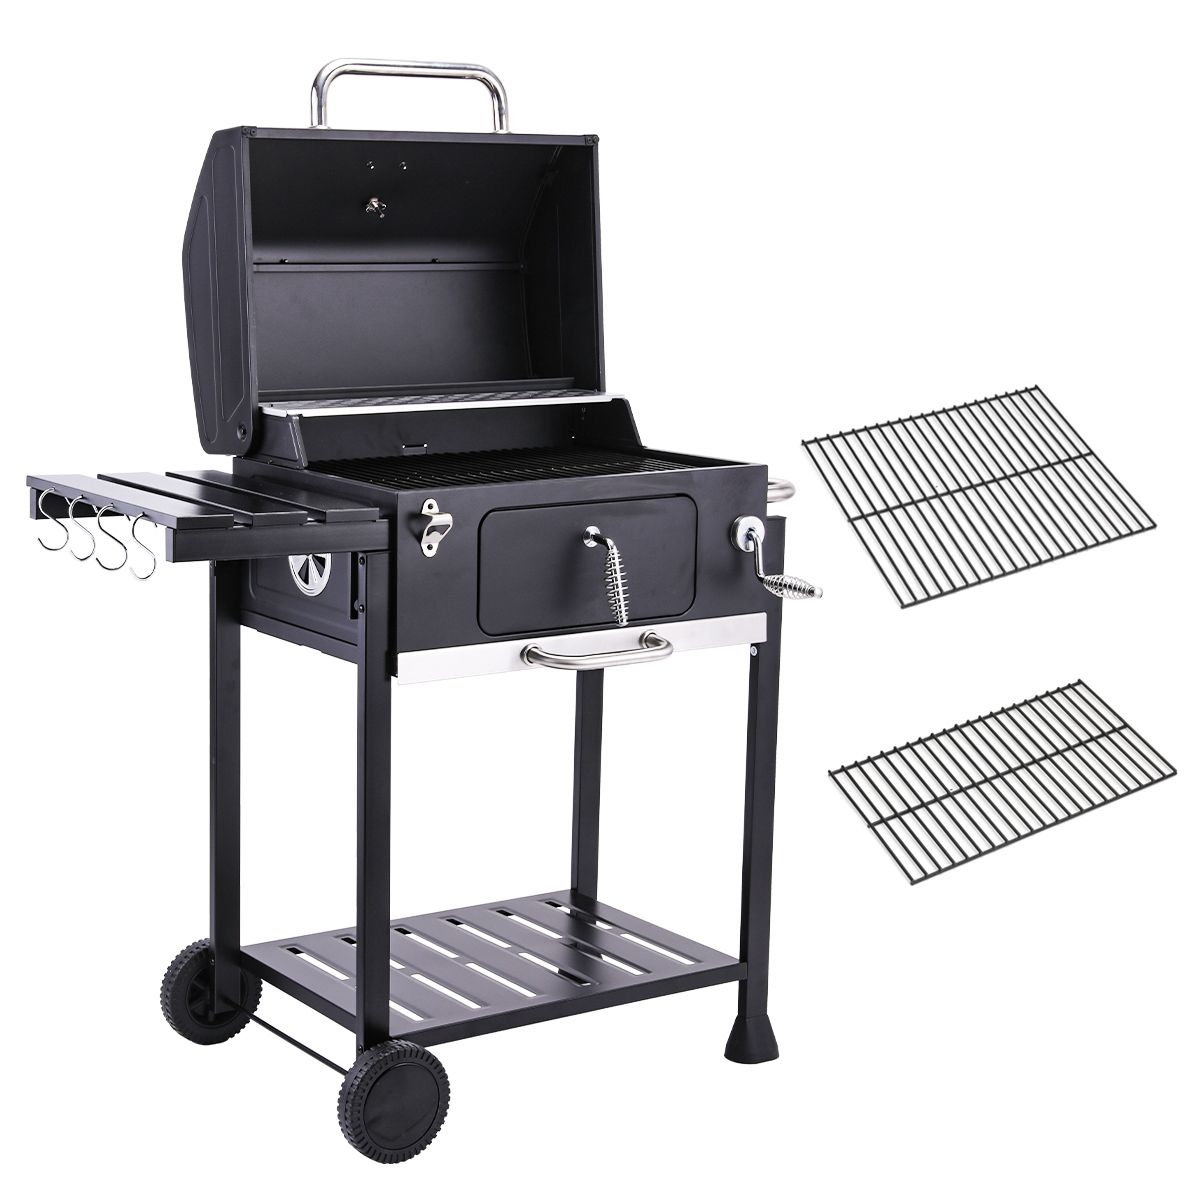 Multifunctional Stainless Steel Outdoor Portable BBQ Charcoal Grill CA-102